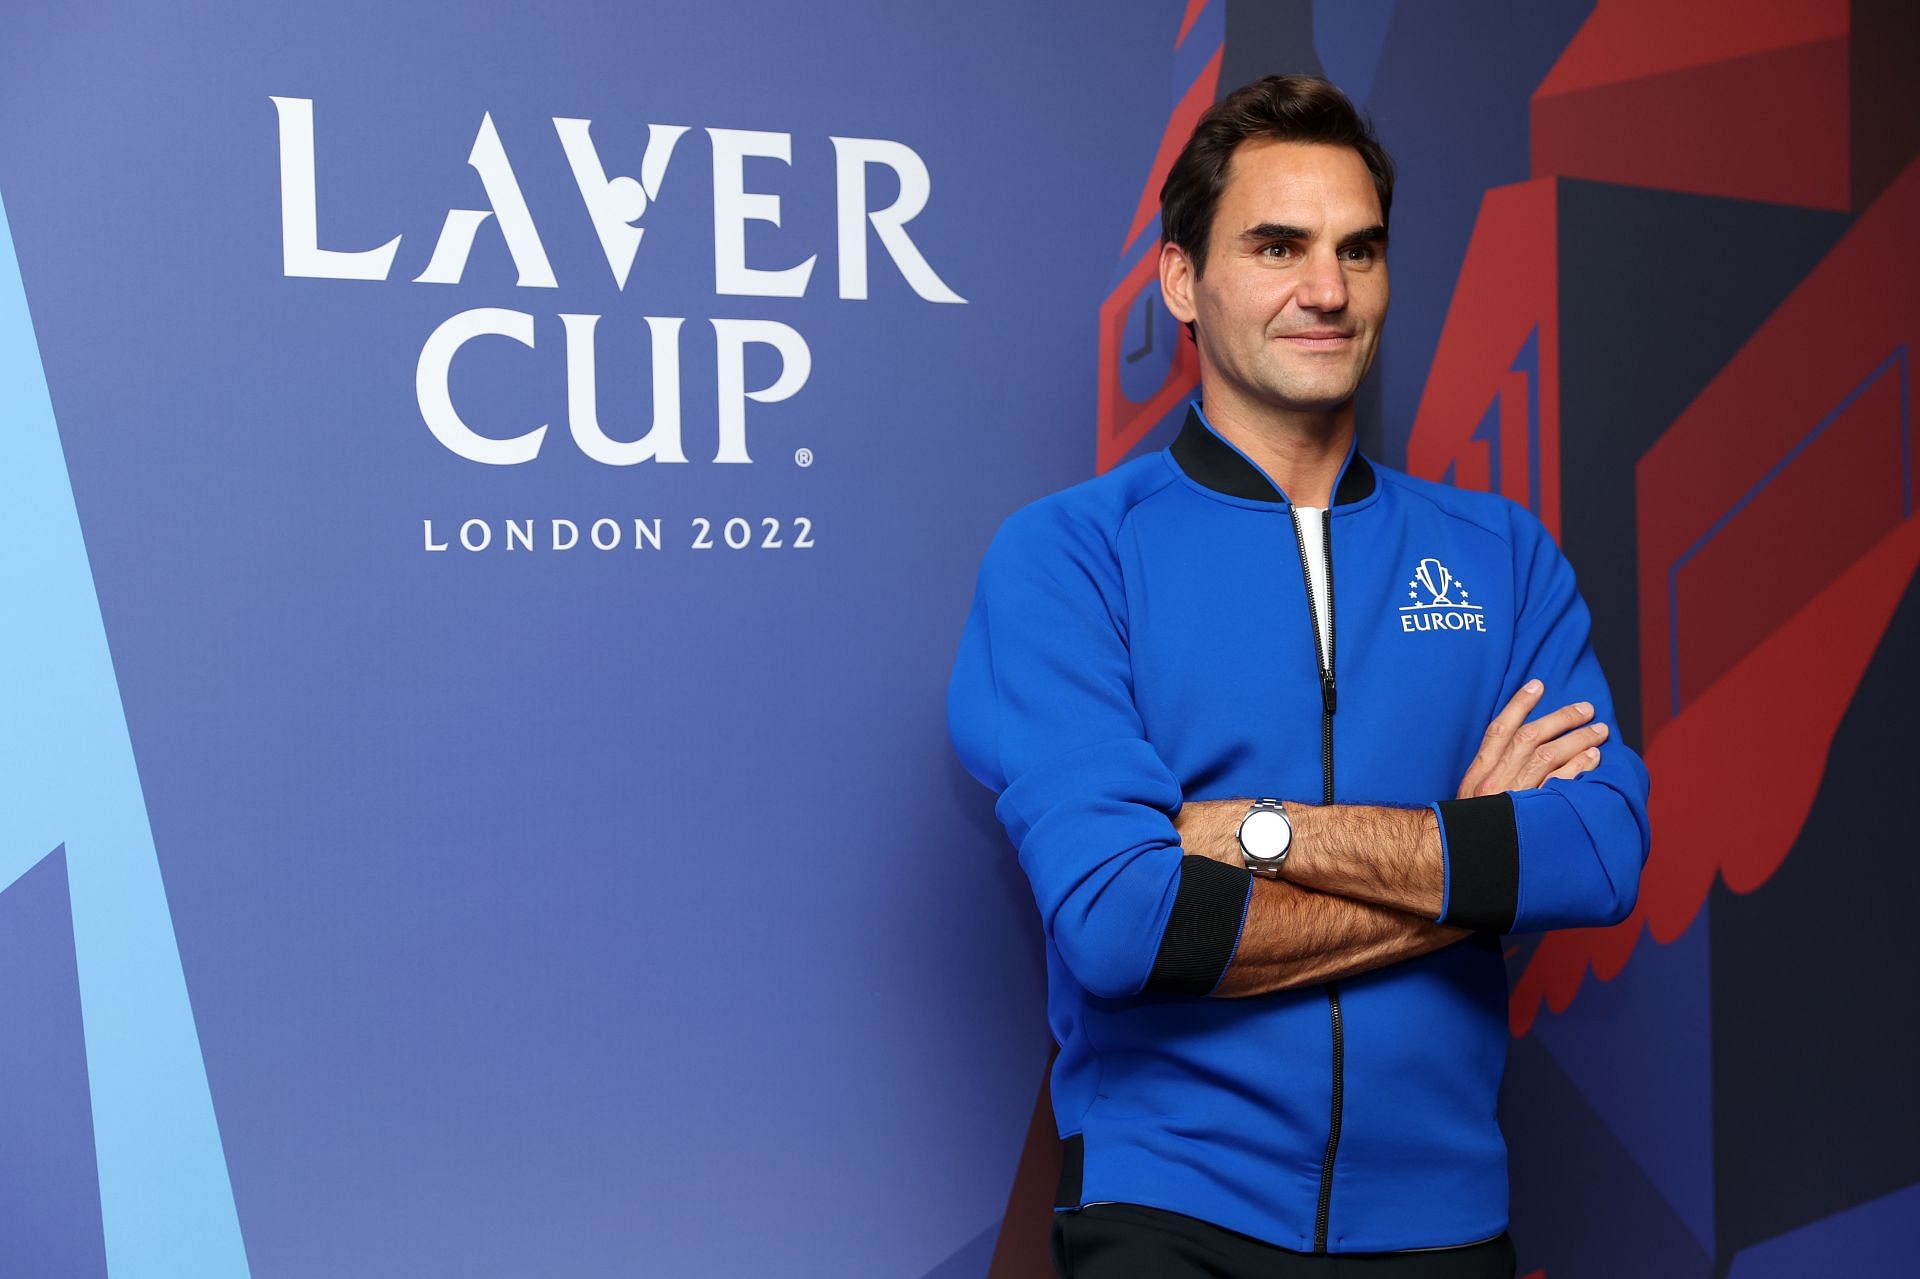 The former World No. 1 at Laver Cup 2022